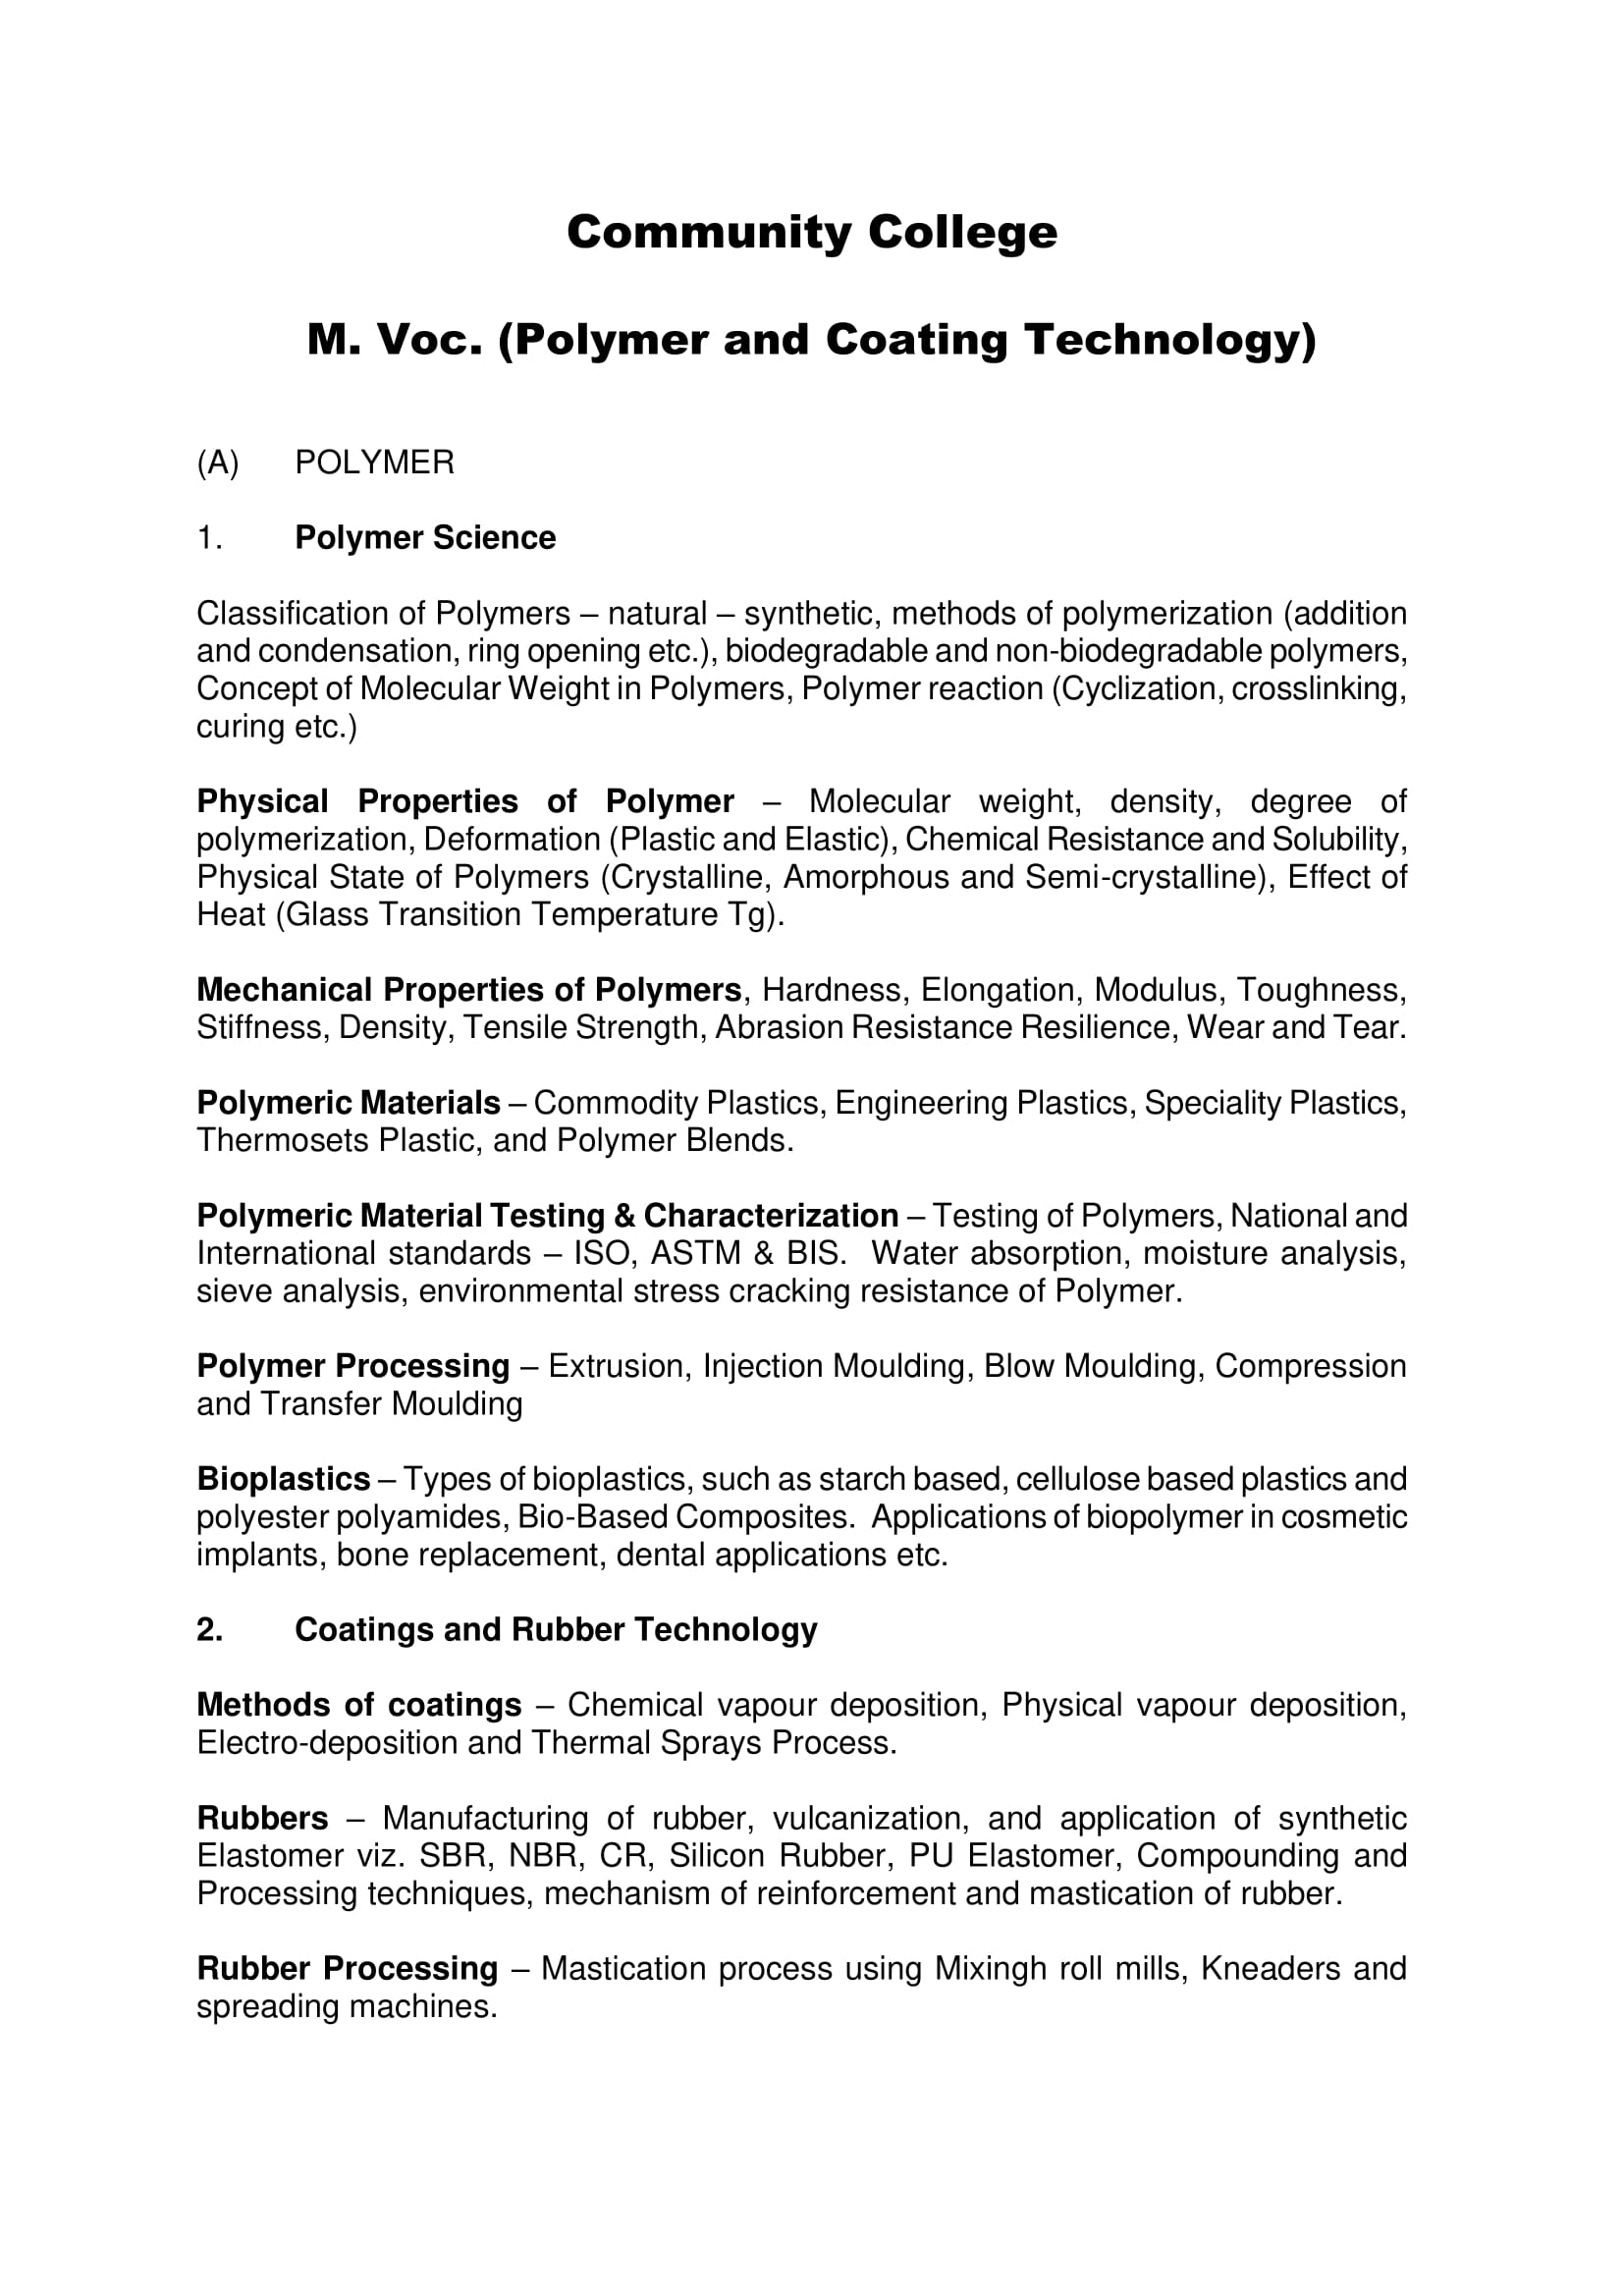 AMU Entrance Exam Syllabus for M.Voc. in Polymer and Coating Technology - Page 1